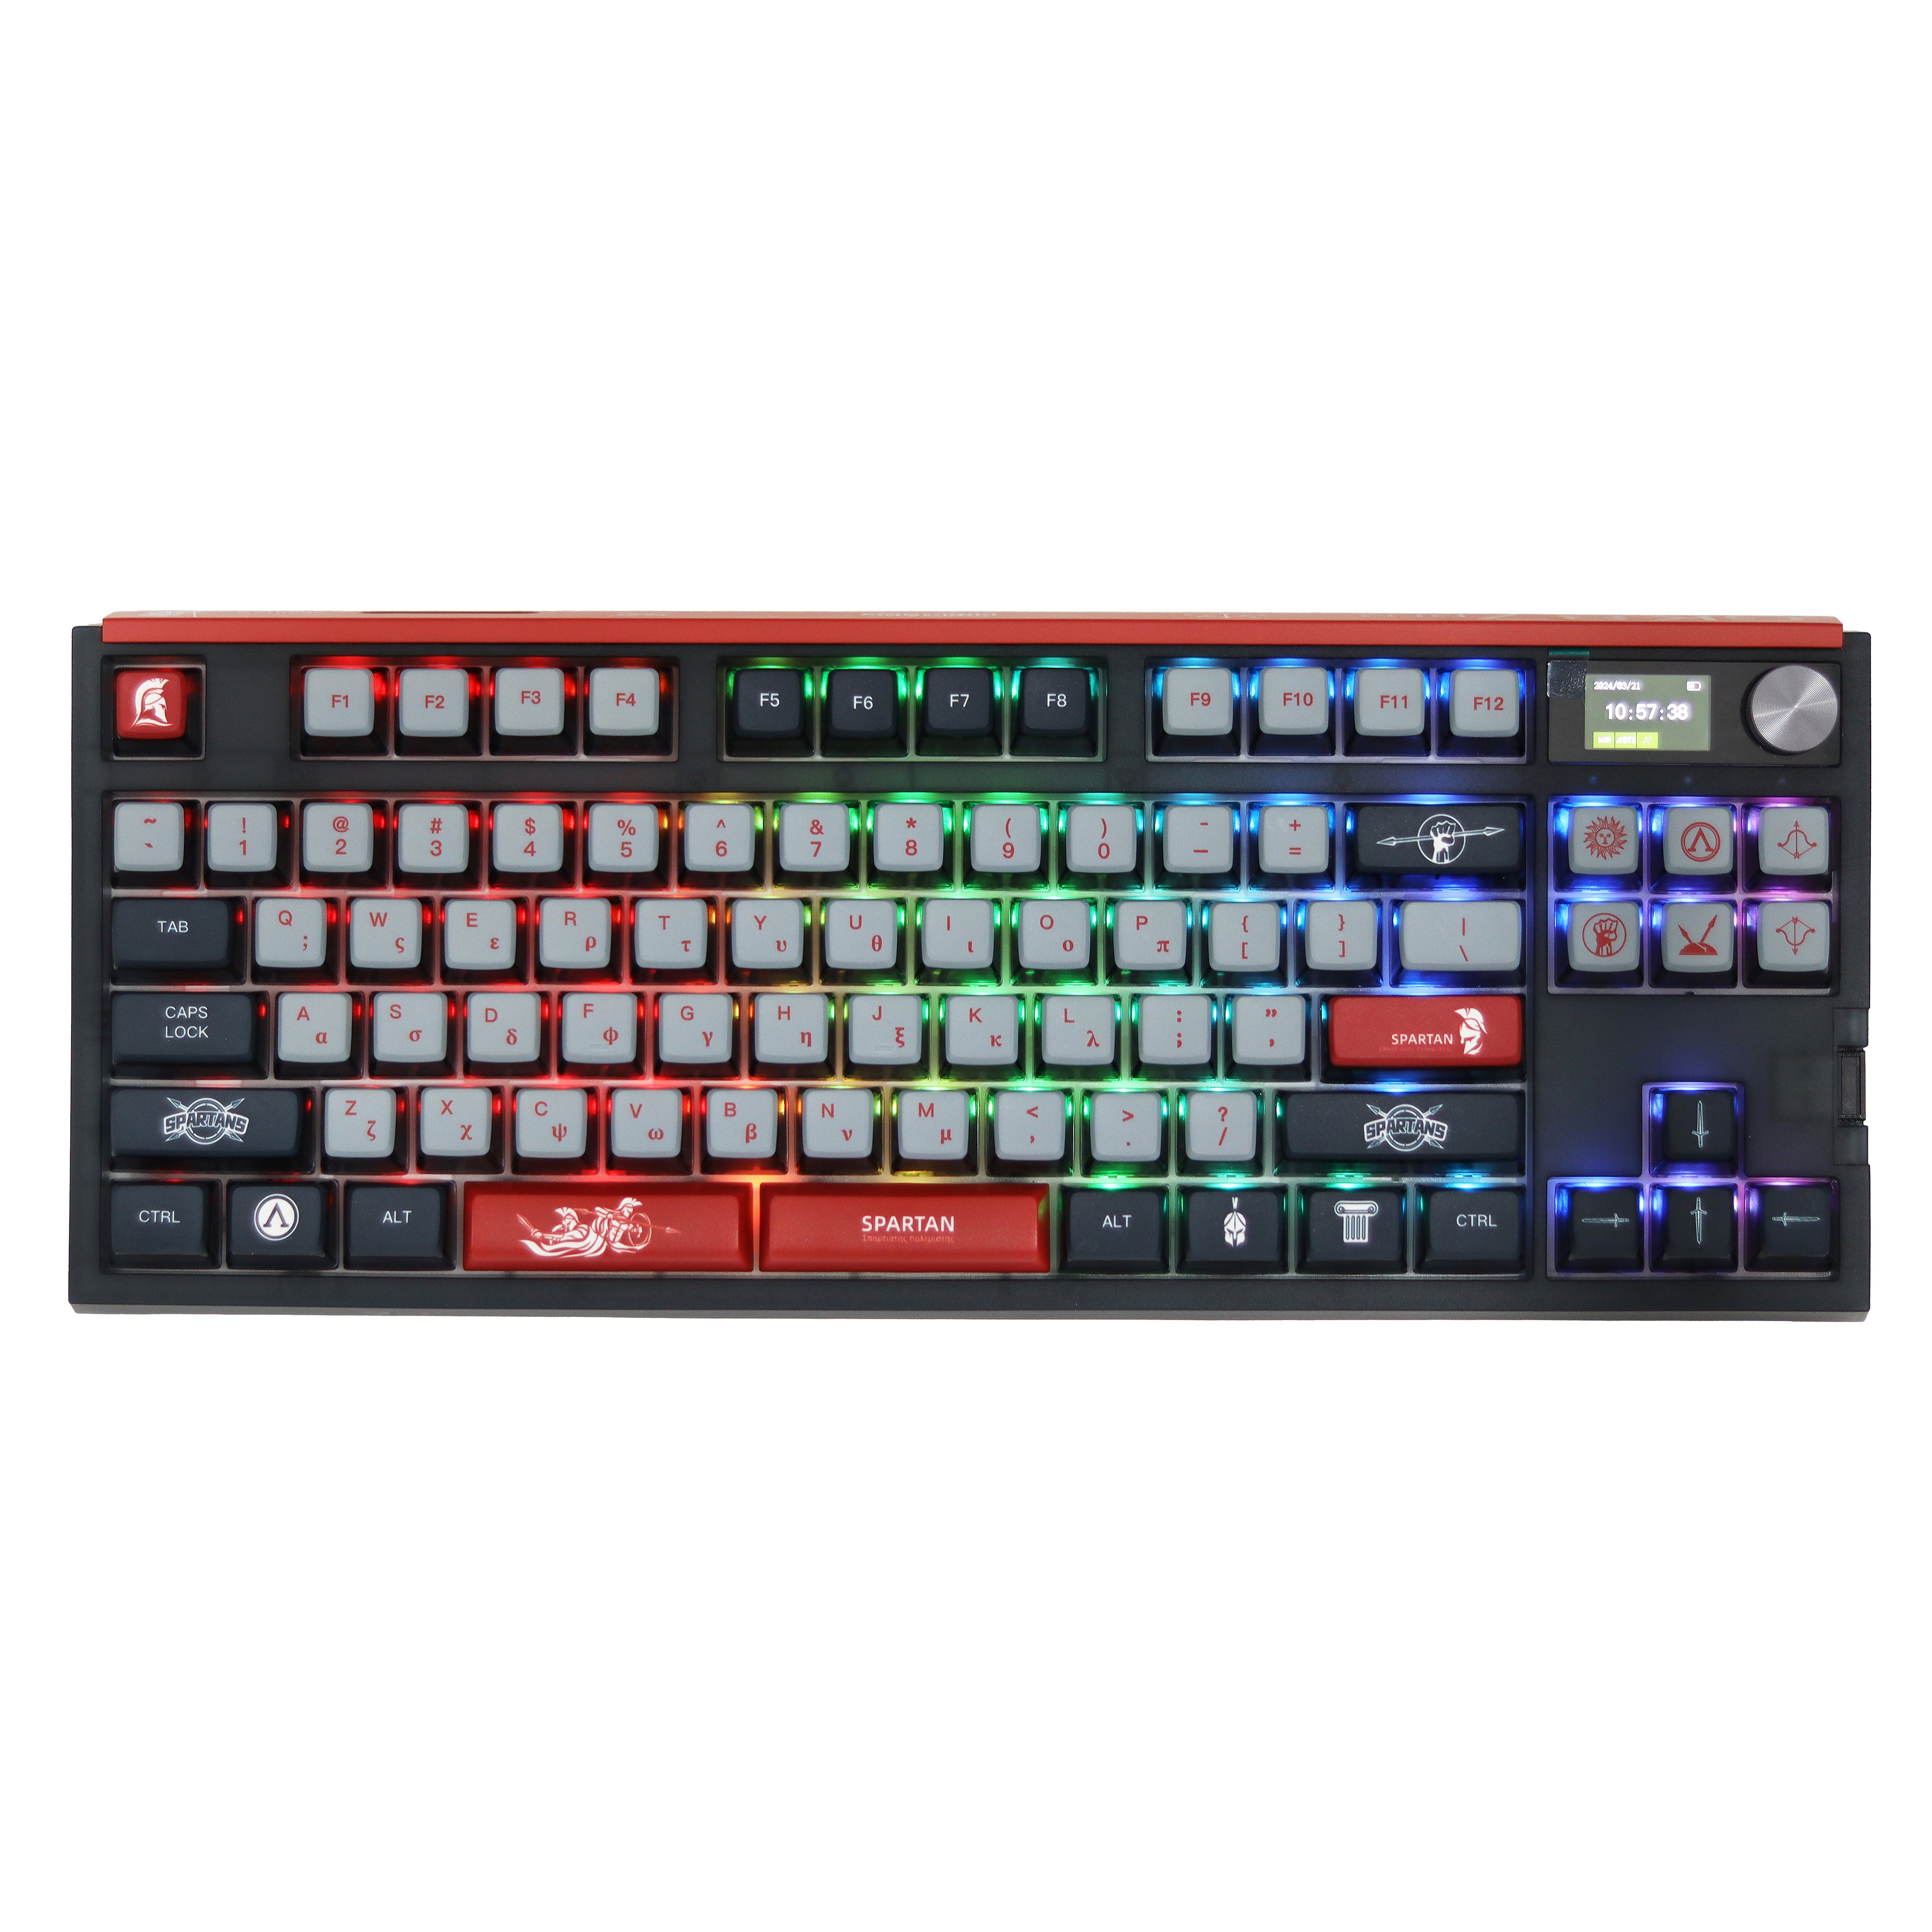 Glacier Skyloong GK87 Pro Youth Wireless/Wired Mechanical Keyboard-Spartan-